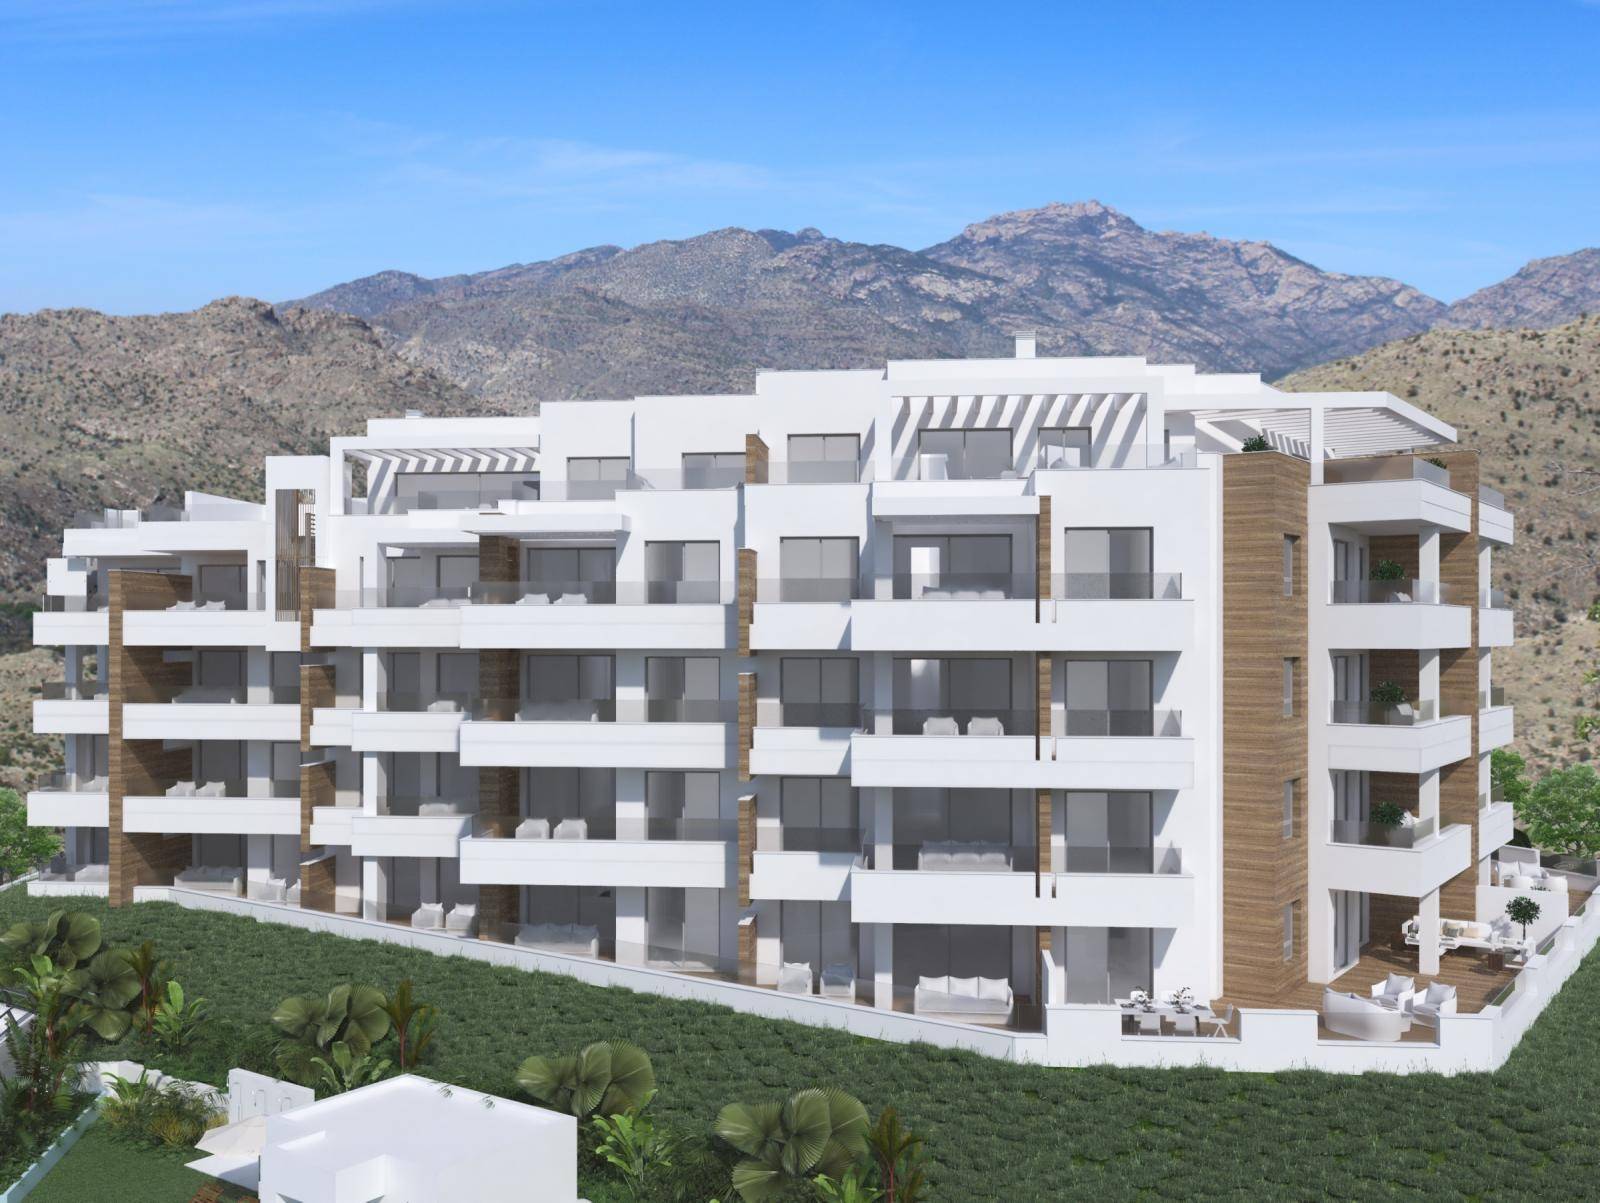 Apartments with 2 Bedrooms for Sale in ISEA Calaceite Torrox from 232.500 € 